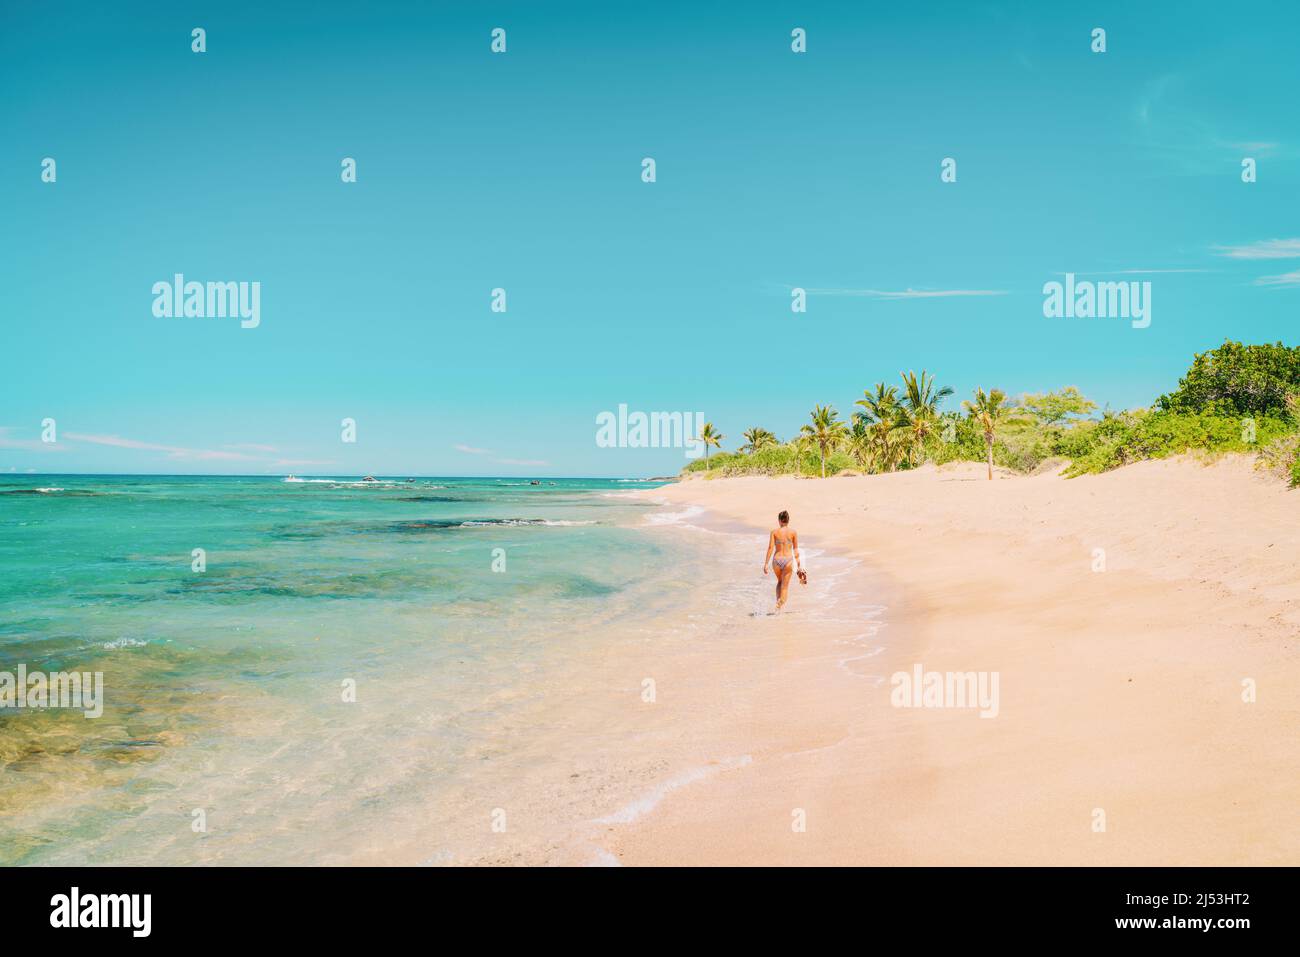 Caribbean beach travel vacation destination woman tourist walking alone on secluded coastline in tropical getaway Stock Photo